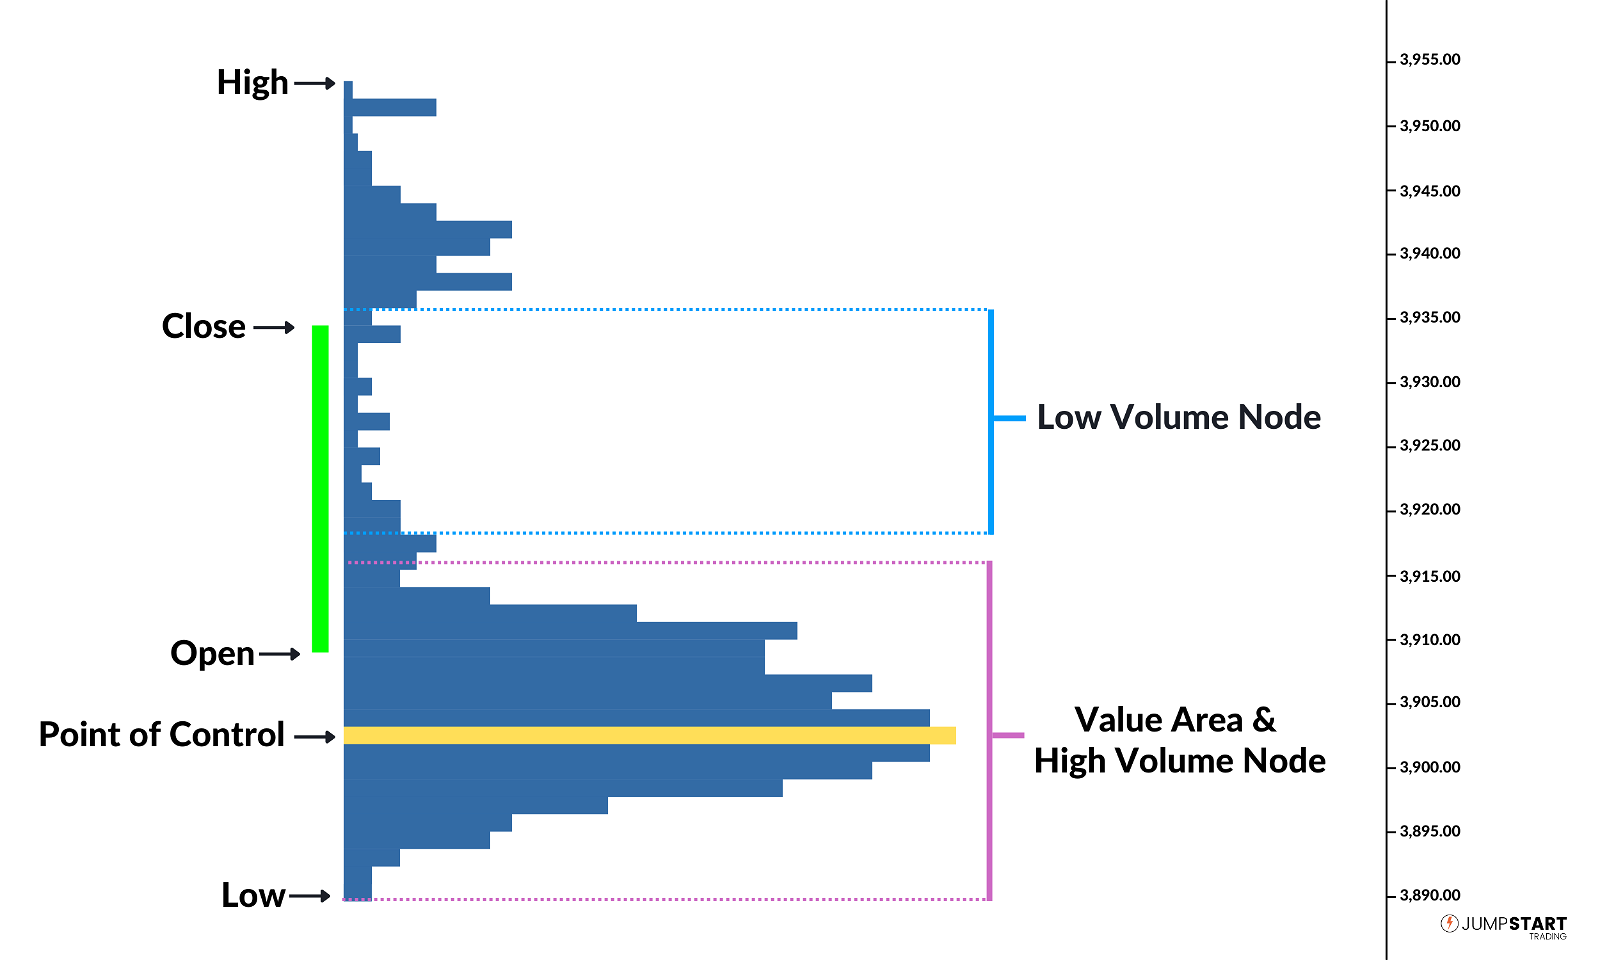 Volume Profile Outlining Point of Control, High Volume Node, and Low Volume Node